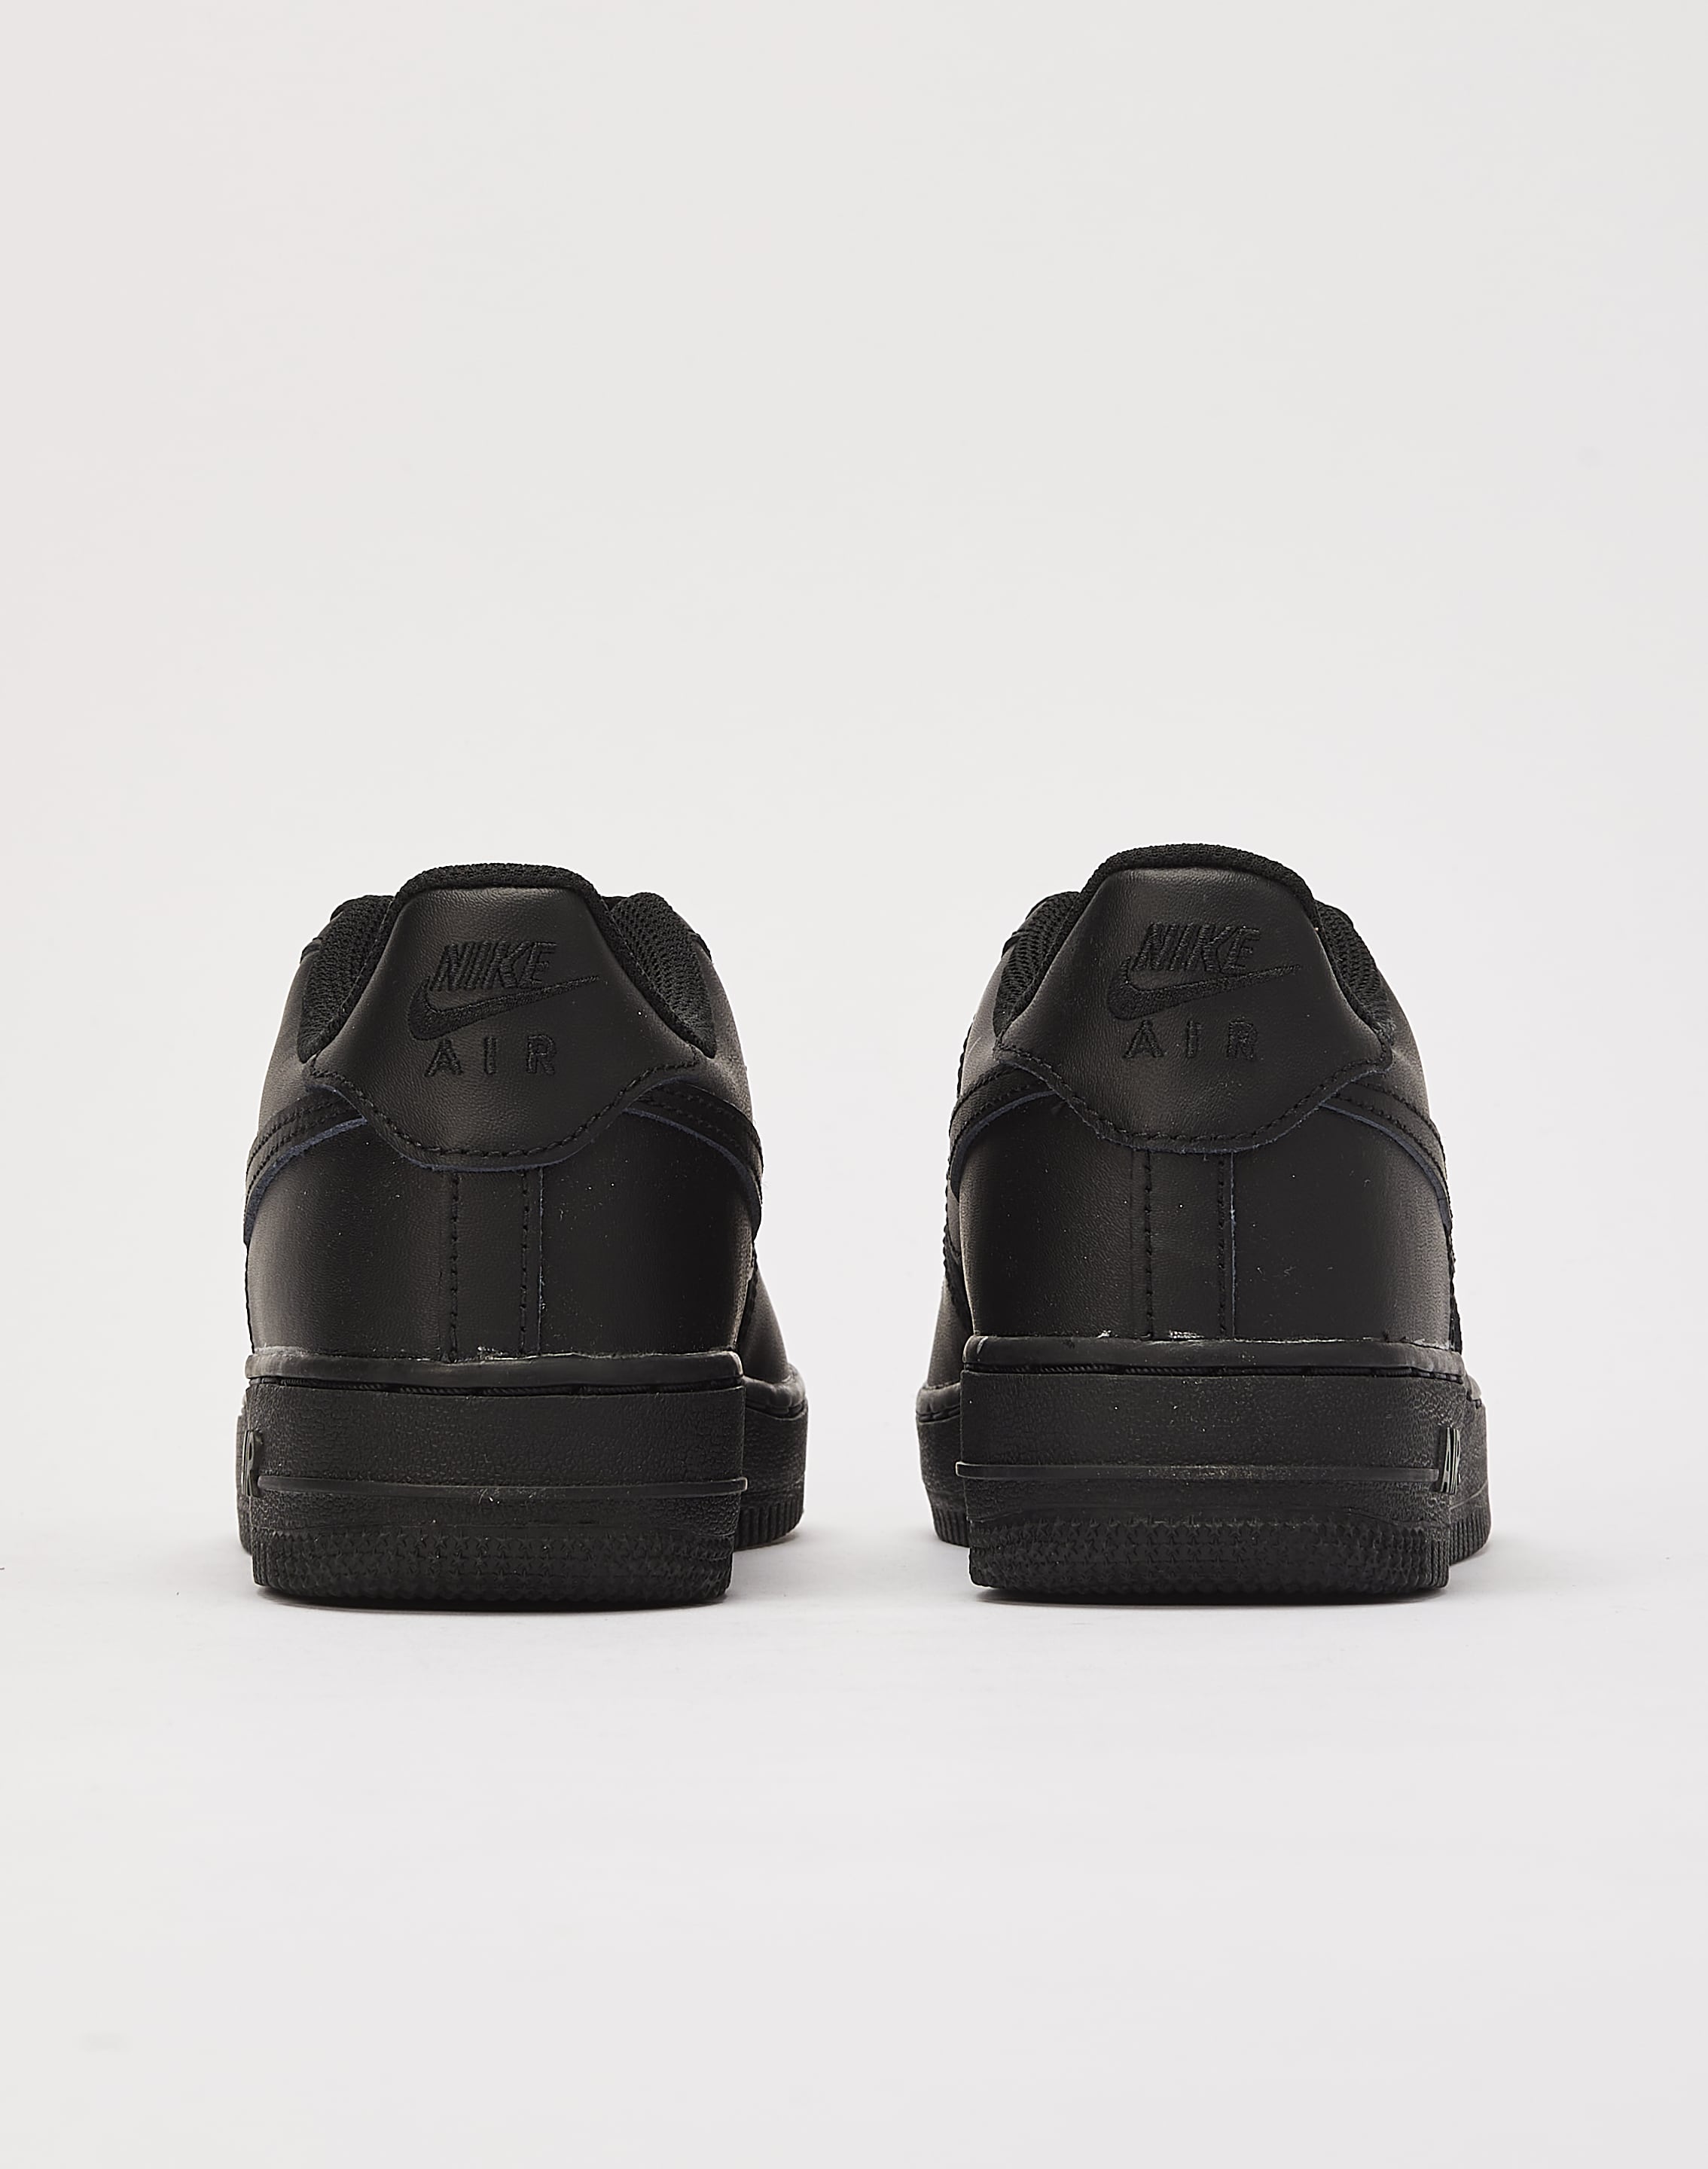 Air Force 1 Low: Nike Air Force 1 Low “Black/White” shoes: Where